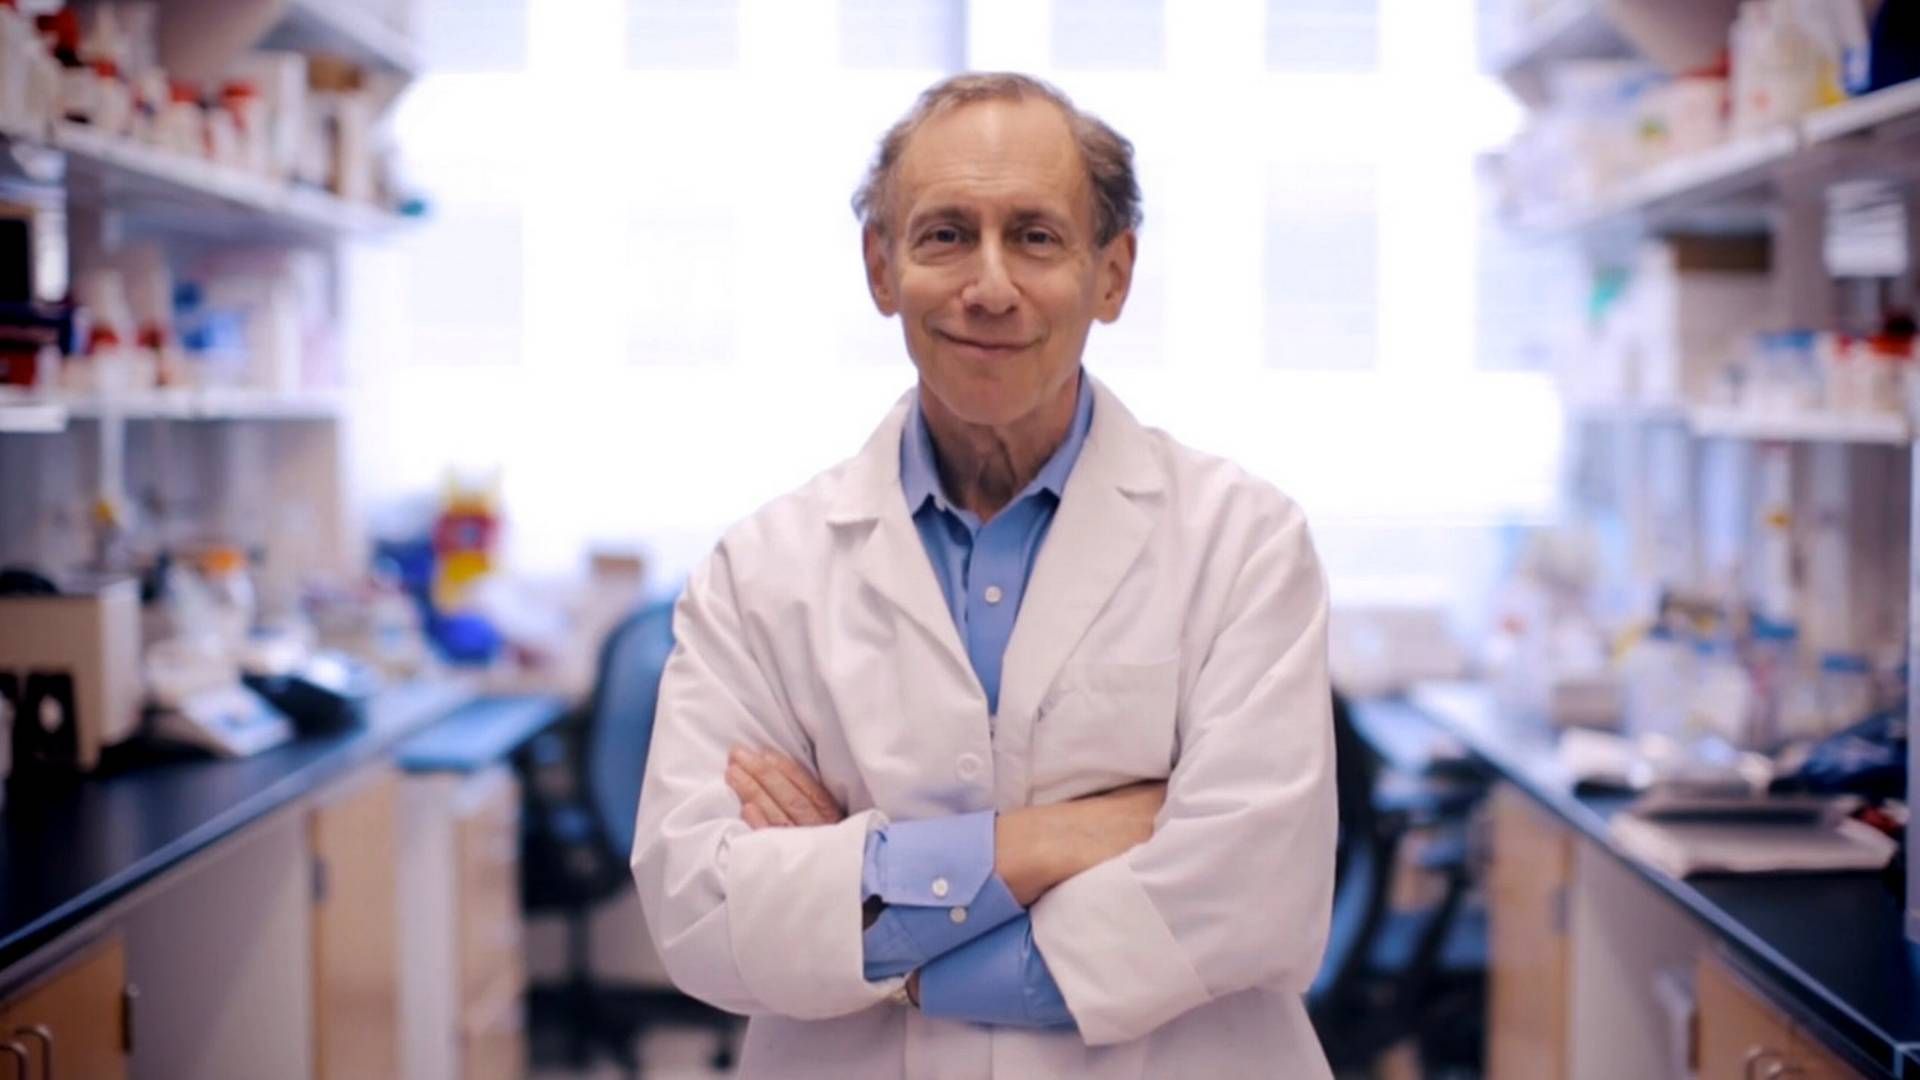 Dr. Robert Langer is currently a professor at the Massachusetts Institute of Technology (MIT). | Photo: Science History Institute